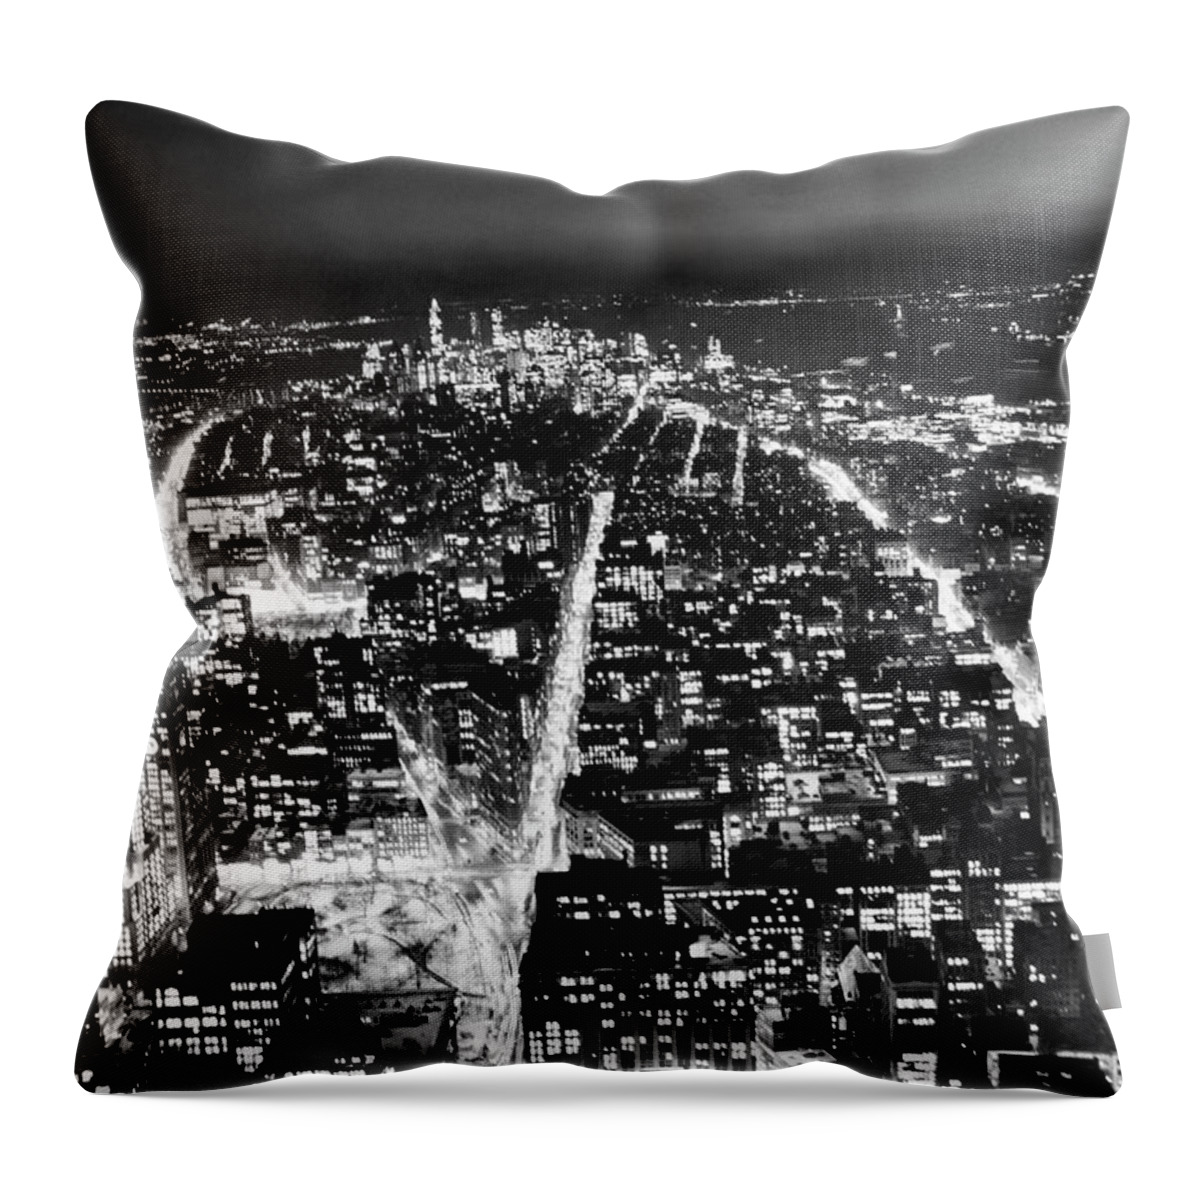 1950s Throw Pillow featuring the photograph New York City At Night by Underwood Archives